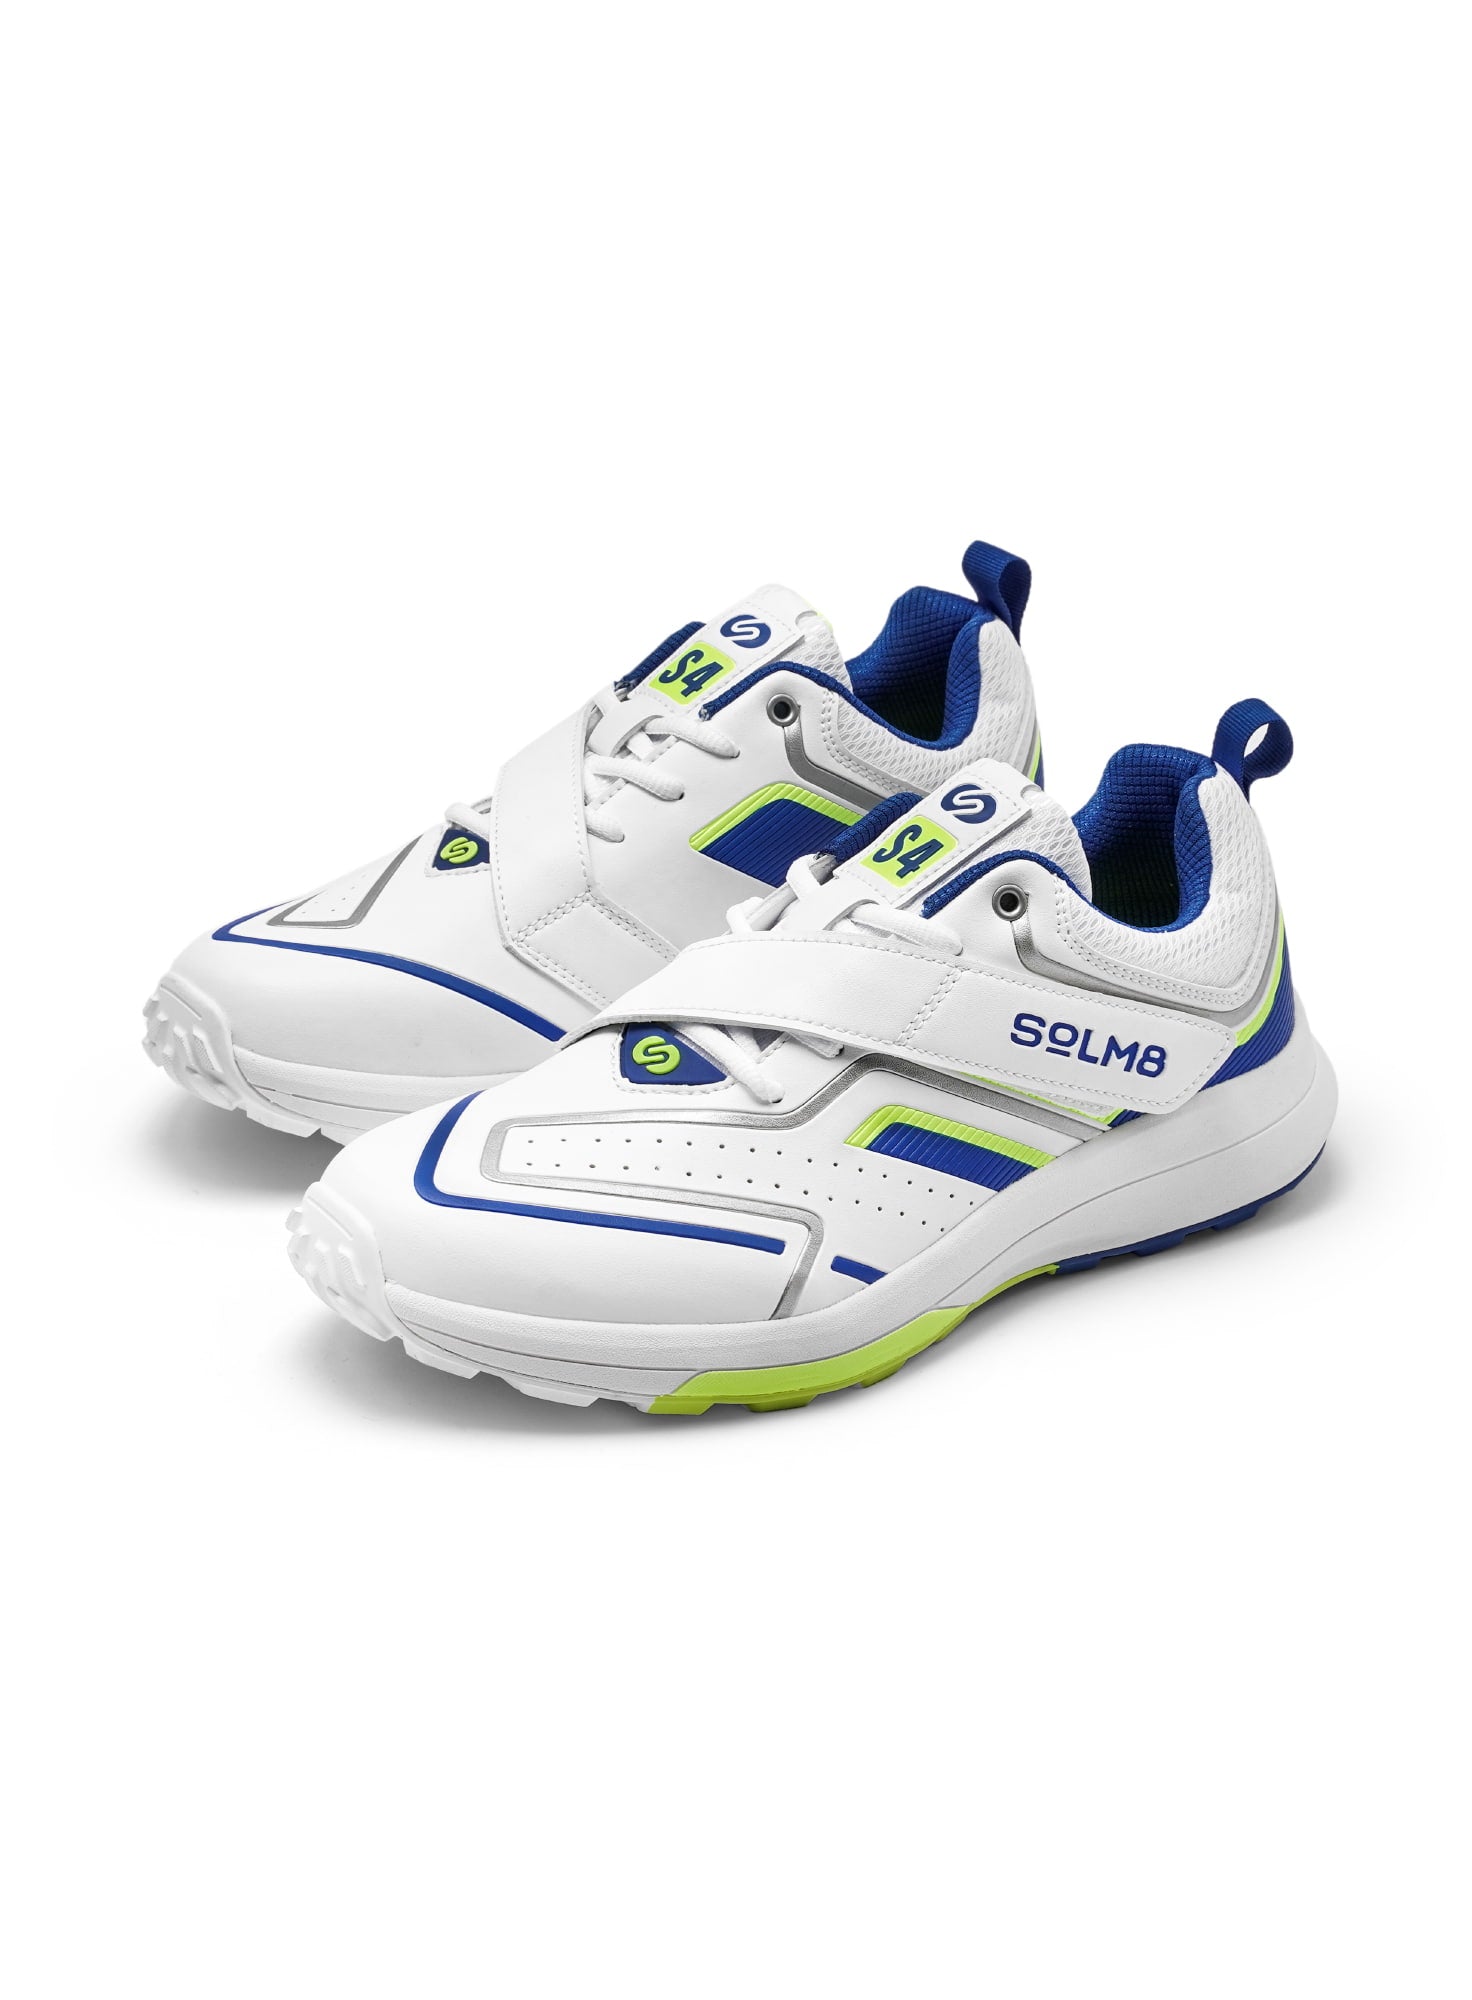 S4 - Shoes for Men Rubber Spikes, All Round Performance Footwear for Turf & Grass